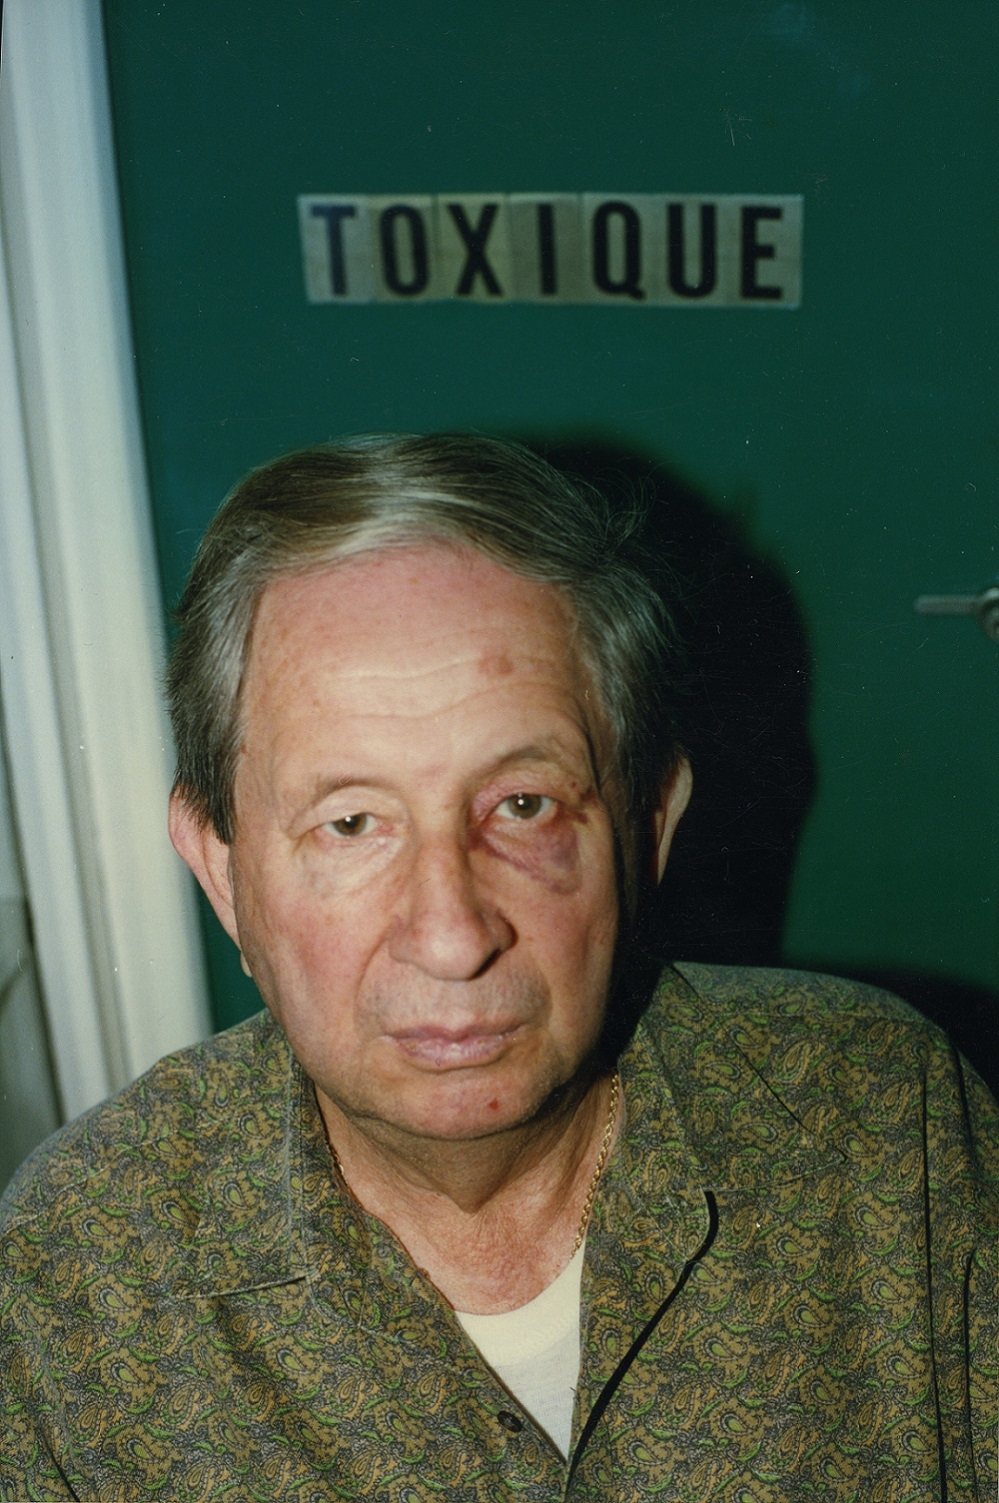 A portrait of a man with a bruised and blackened eye standing in front of a door that reads: "TOXIQUE"